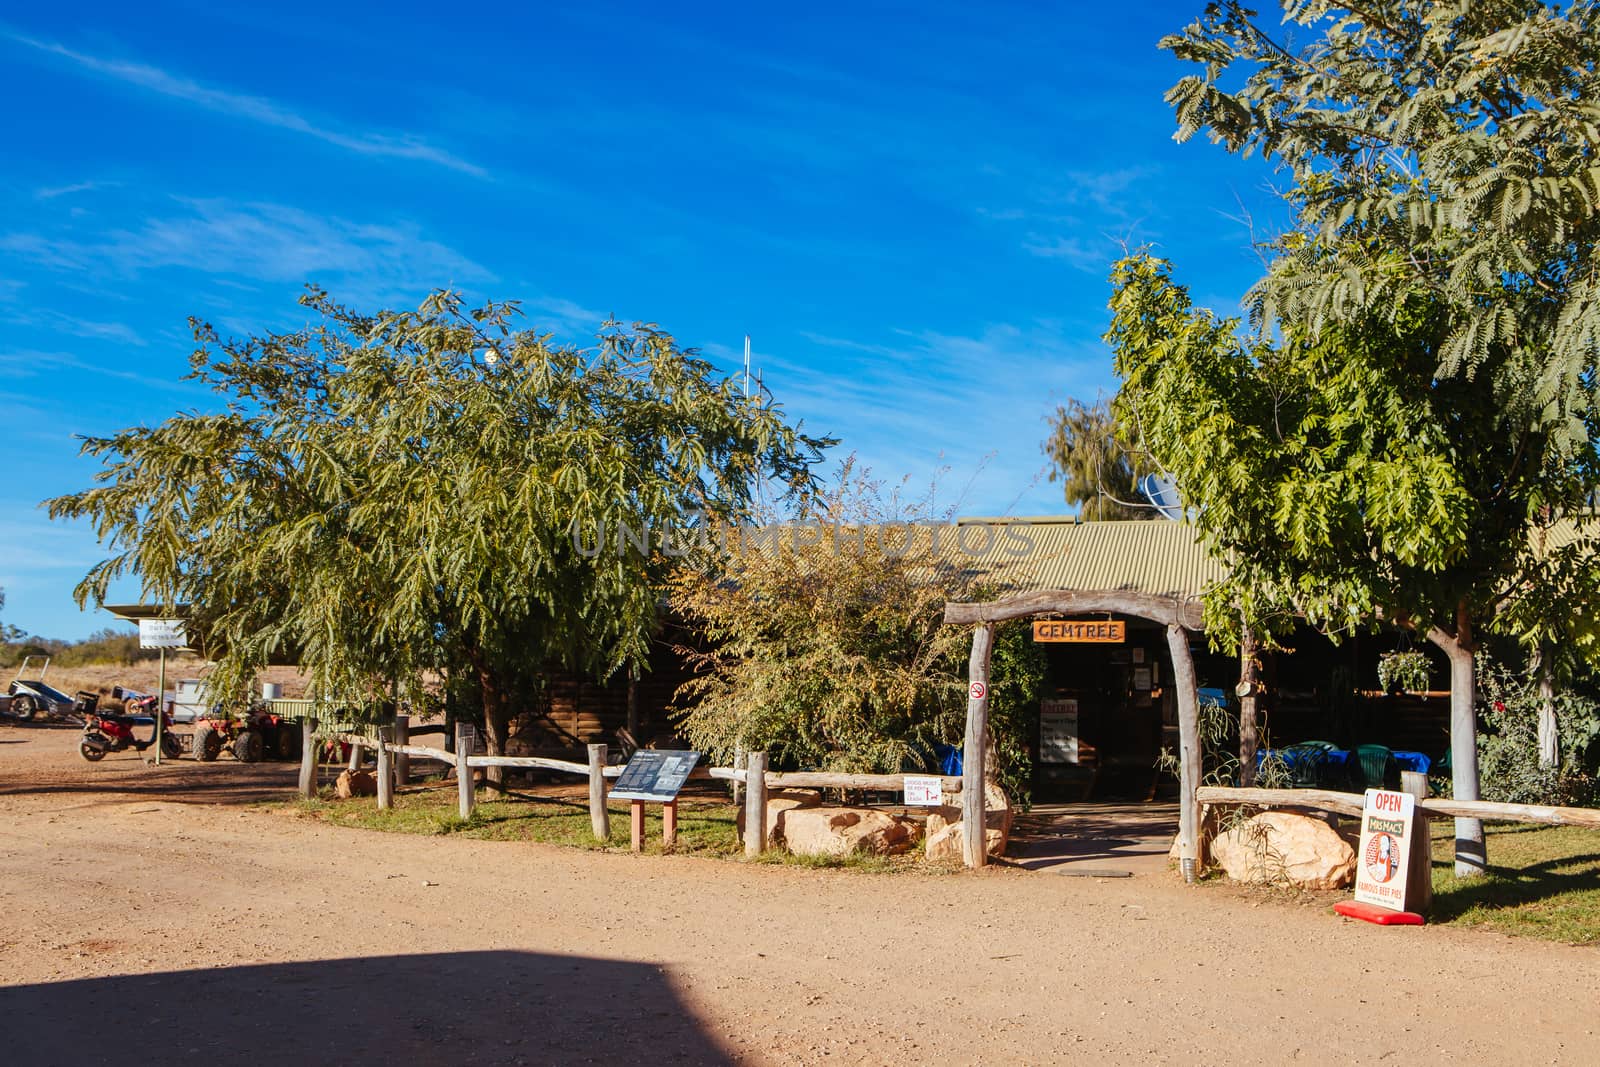 Gemtree, Australia - July 11 2015: The small town of Gemtree in the Harts Ranges, Northern Territory, Australia